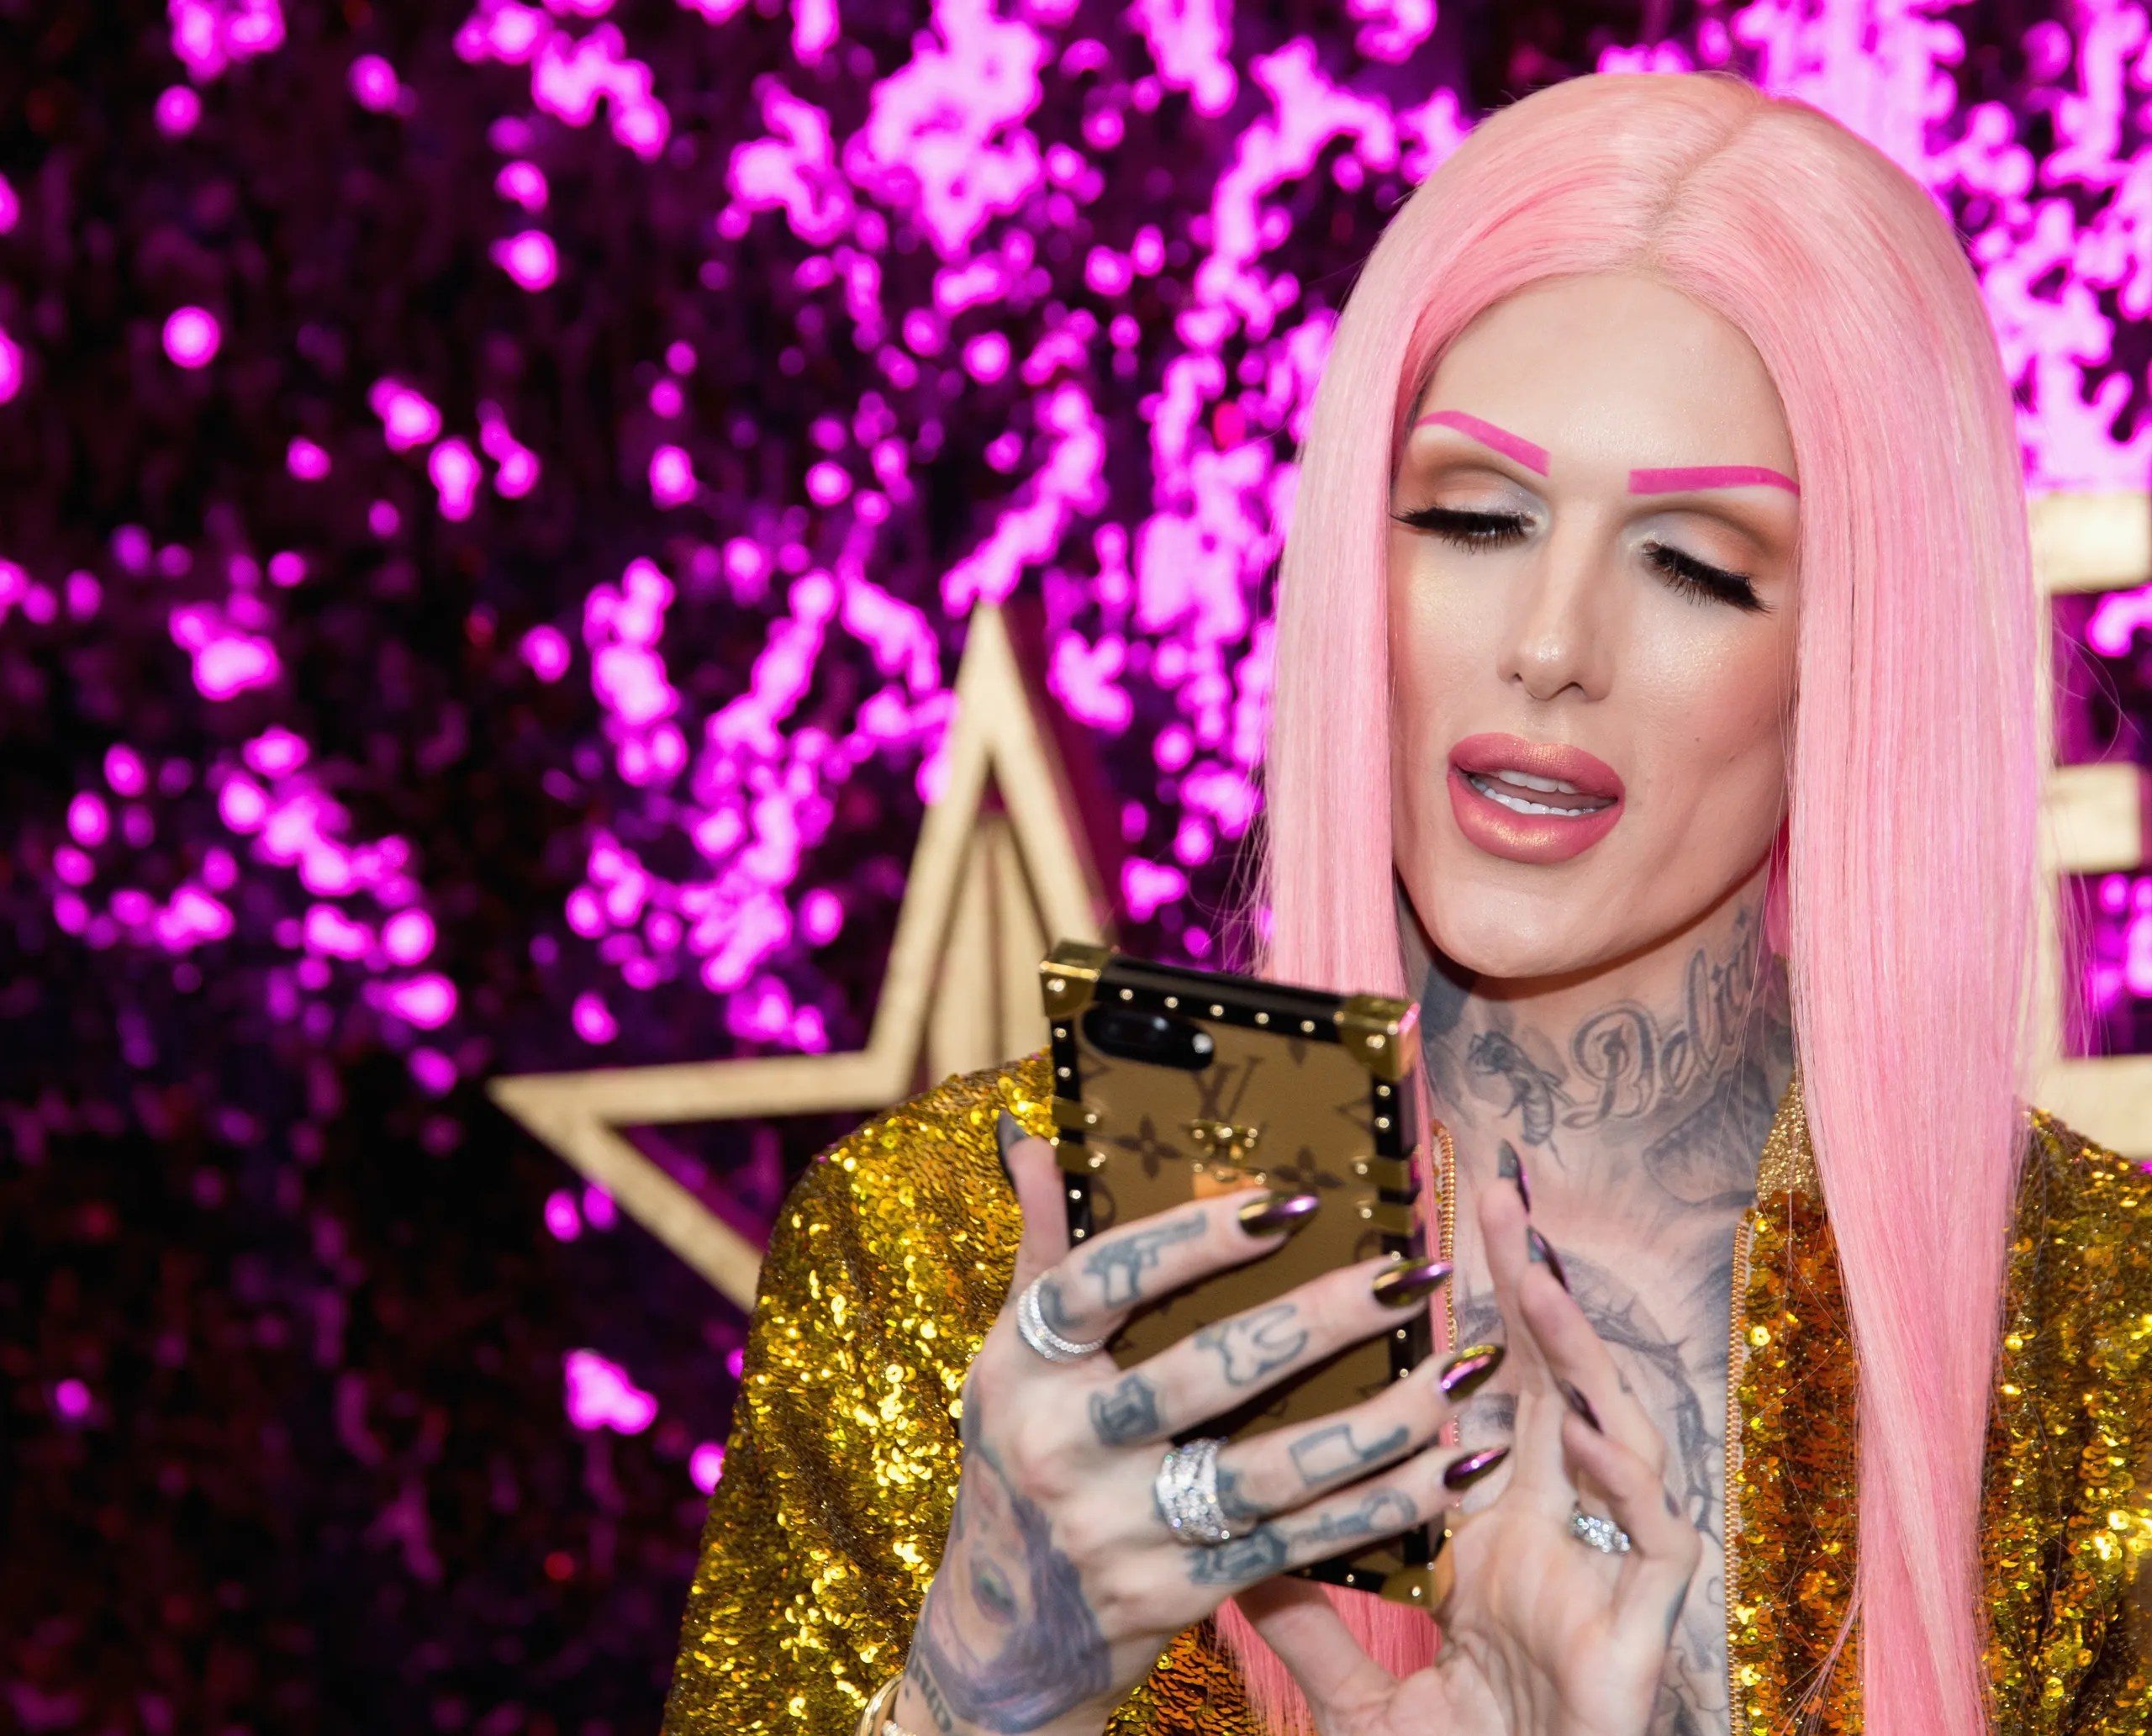 Jeffree Star Reportedly Paid Accuser 45,000 to Recant Assault Claims